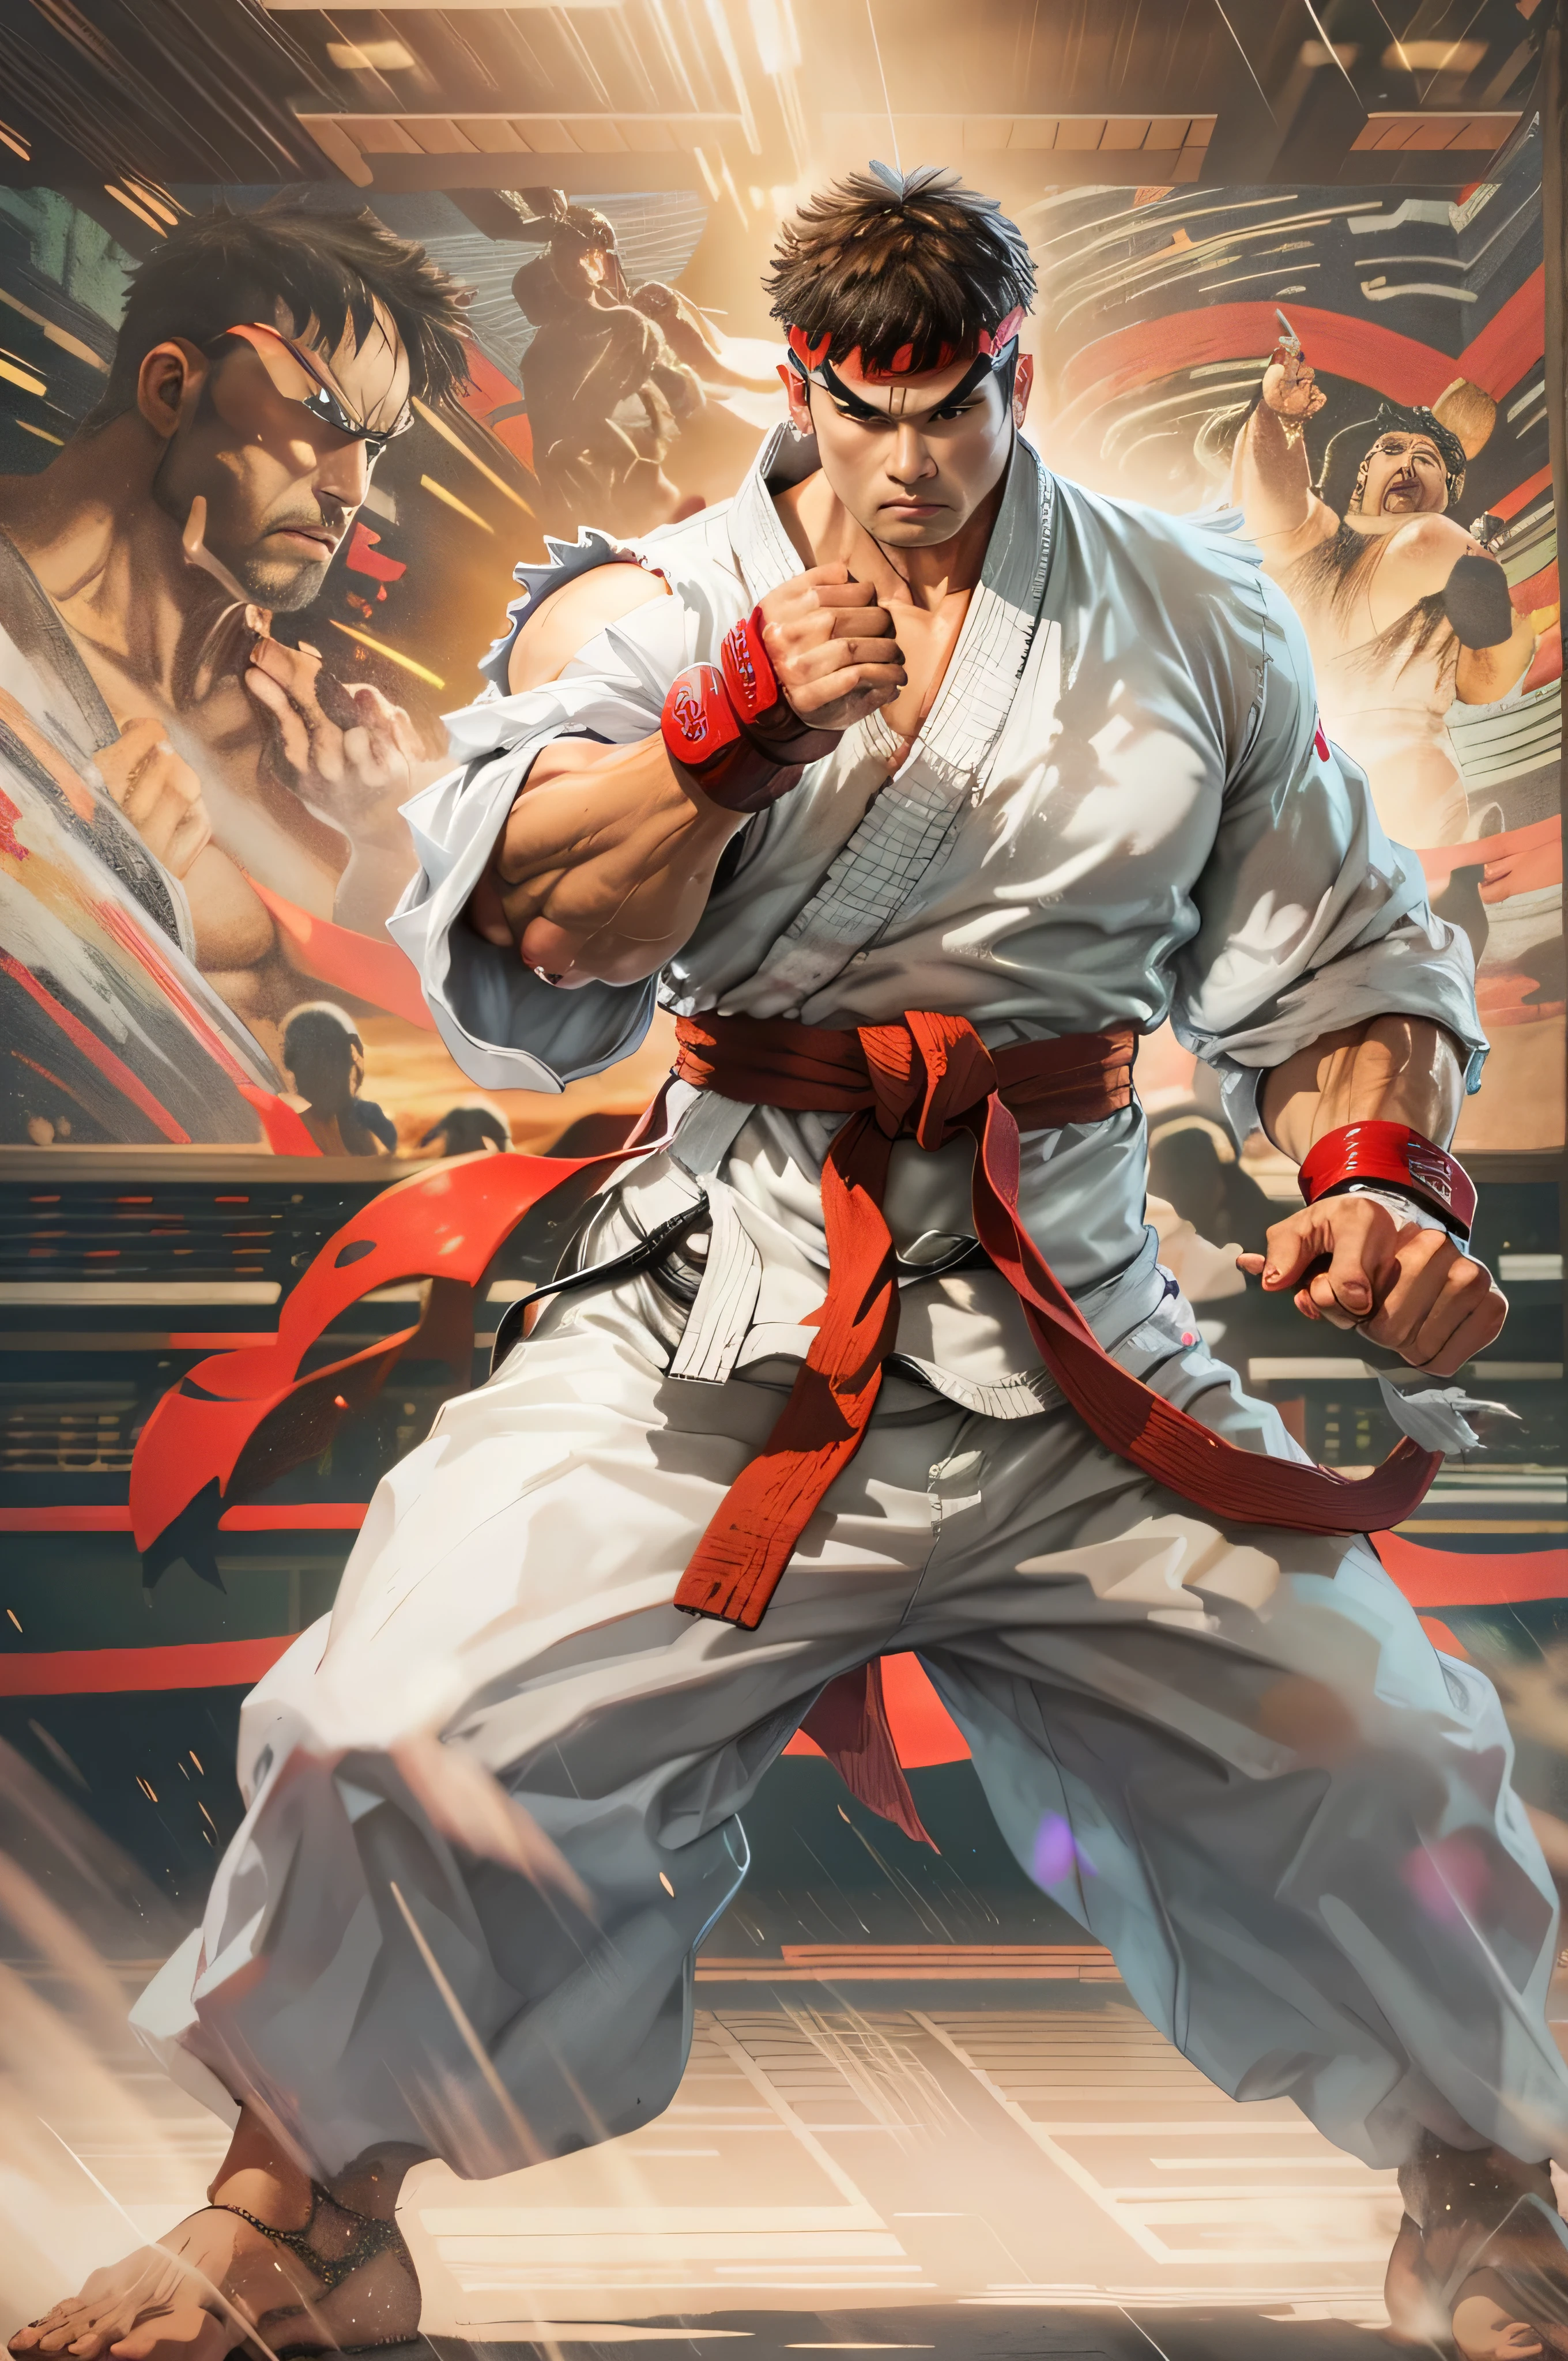 1  man ryu solo、Fighting Game Fighter、street fighter , wearing complete karate kimono、Fitness Body Shape、Pose ready to fight、battle look, close up,  karate pose, making a hadoken special move